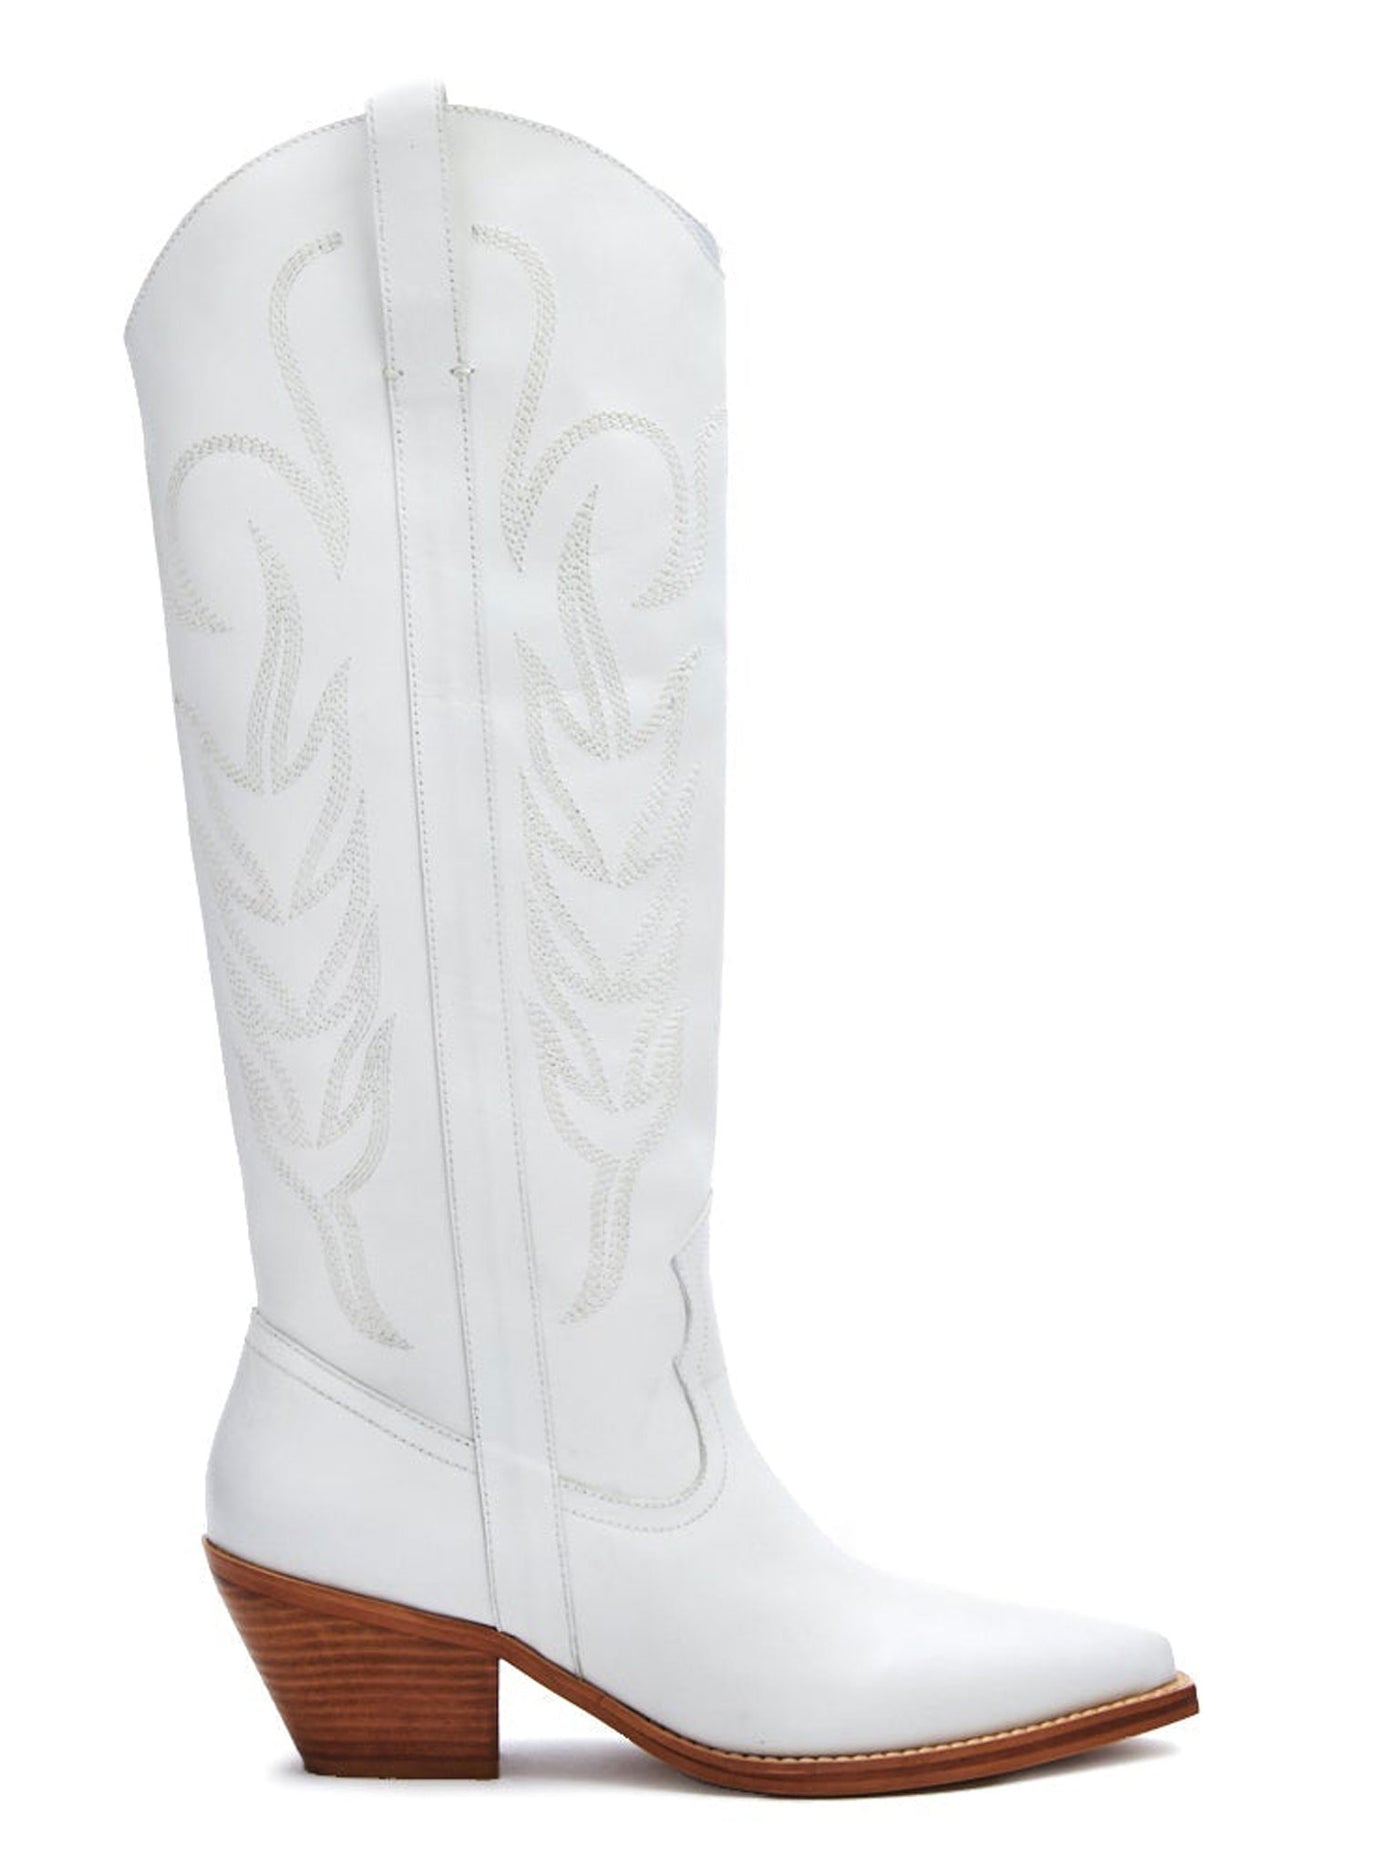 Agency White Western Boots